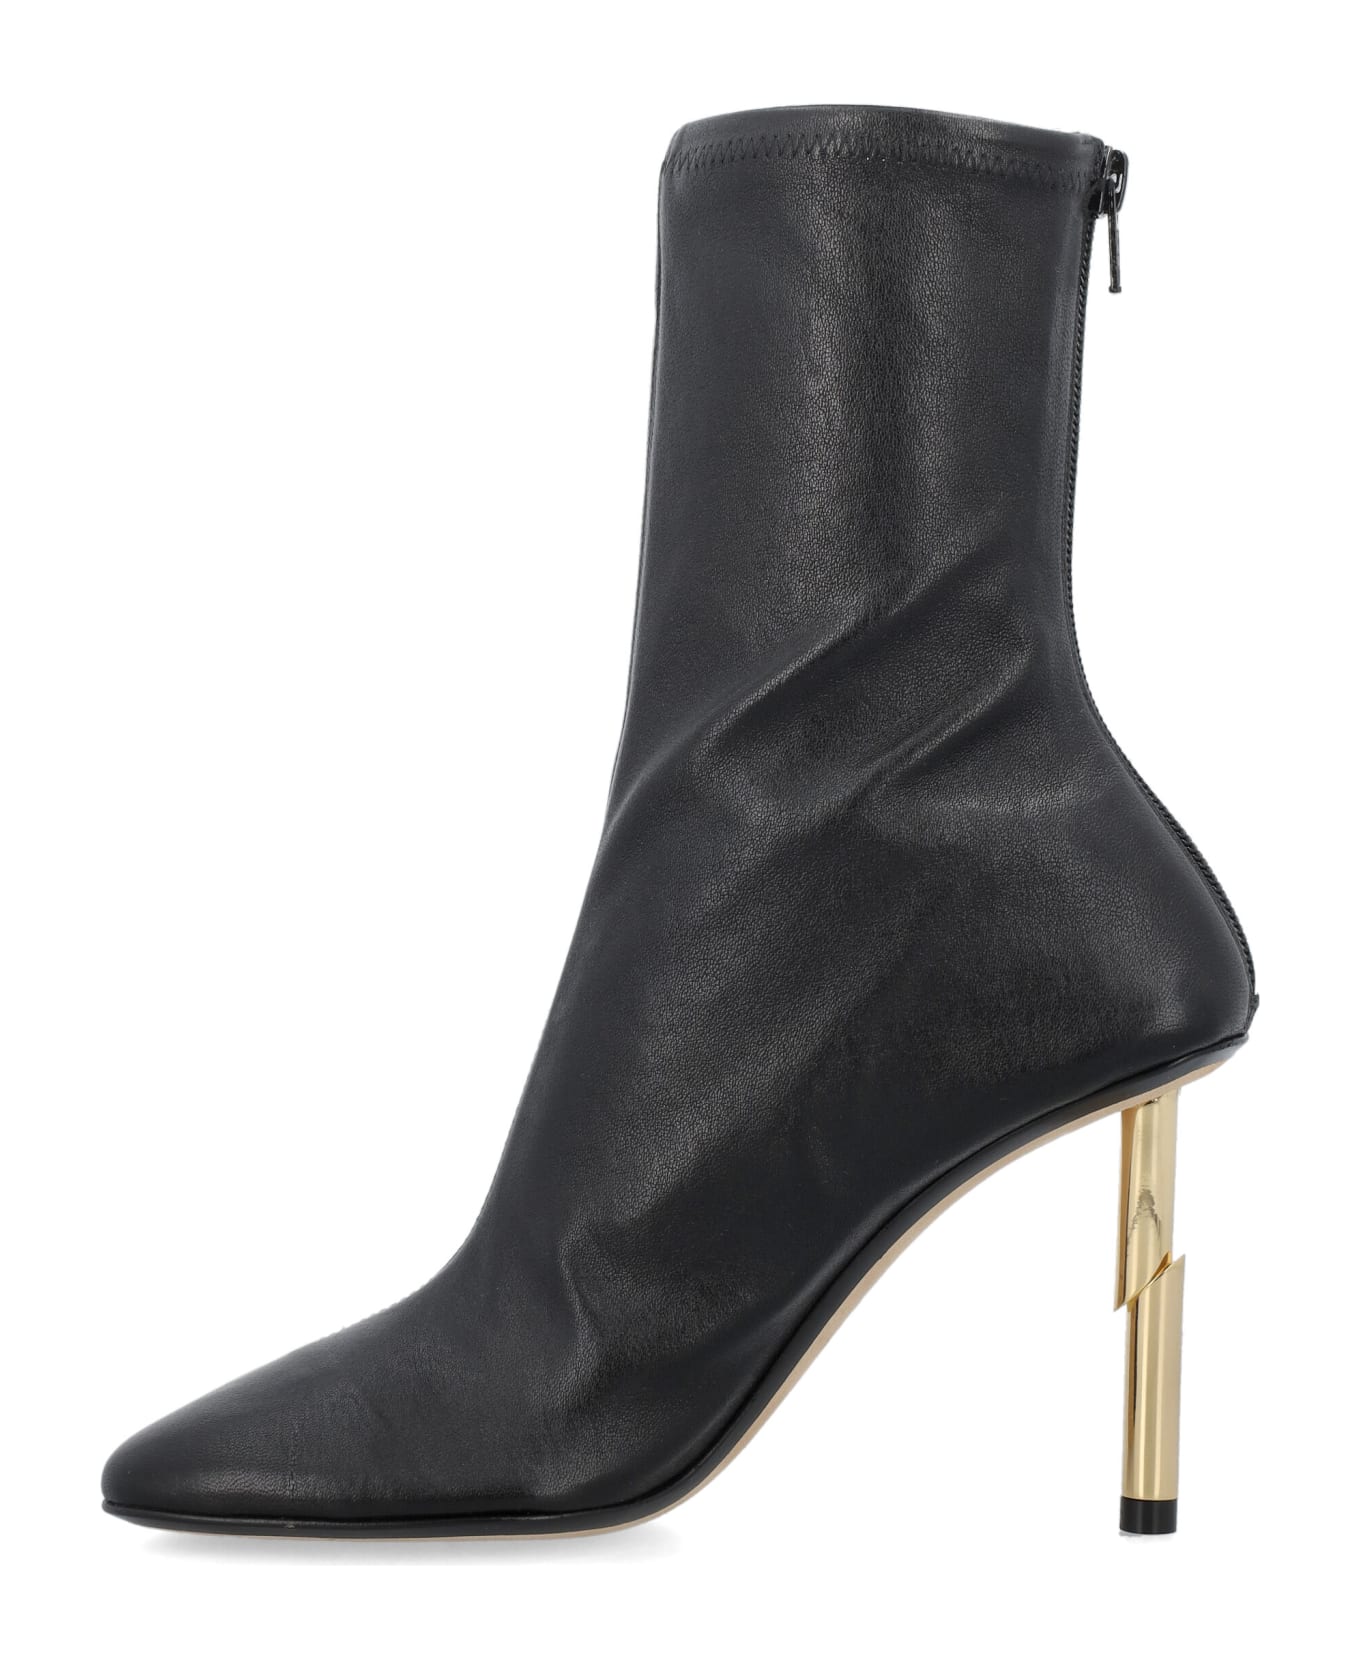 Lanvin Sequence Ankle Boots - BLACK